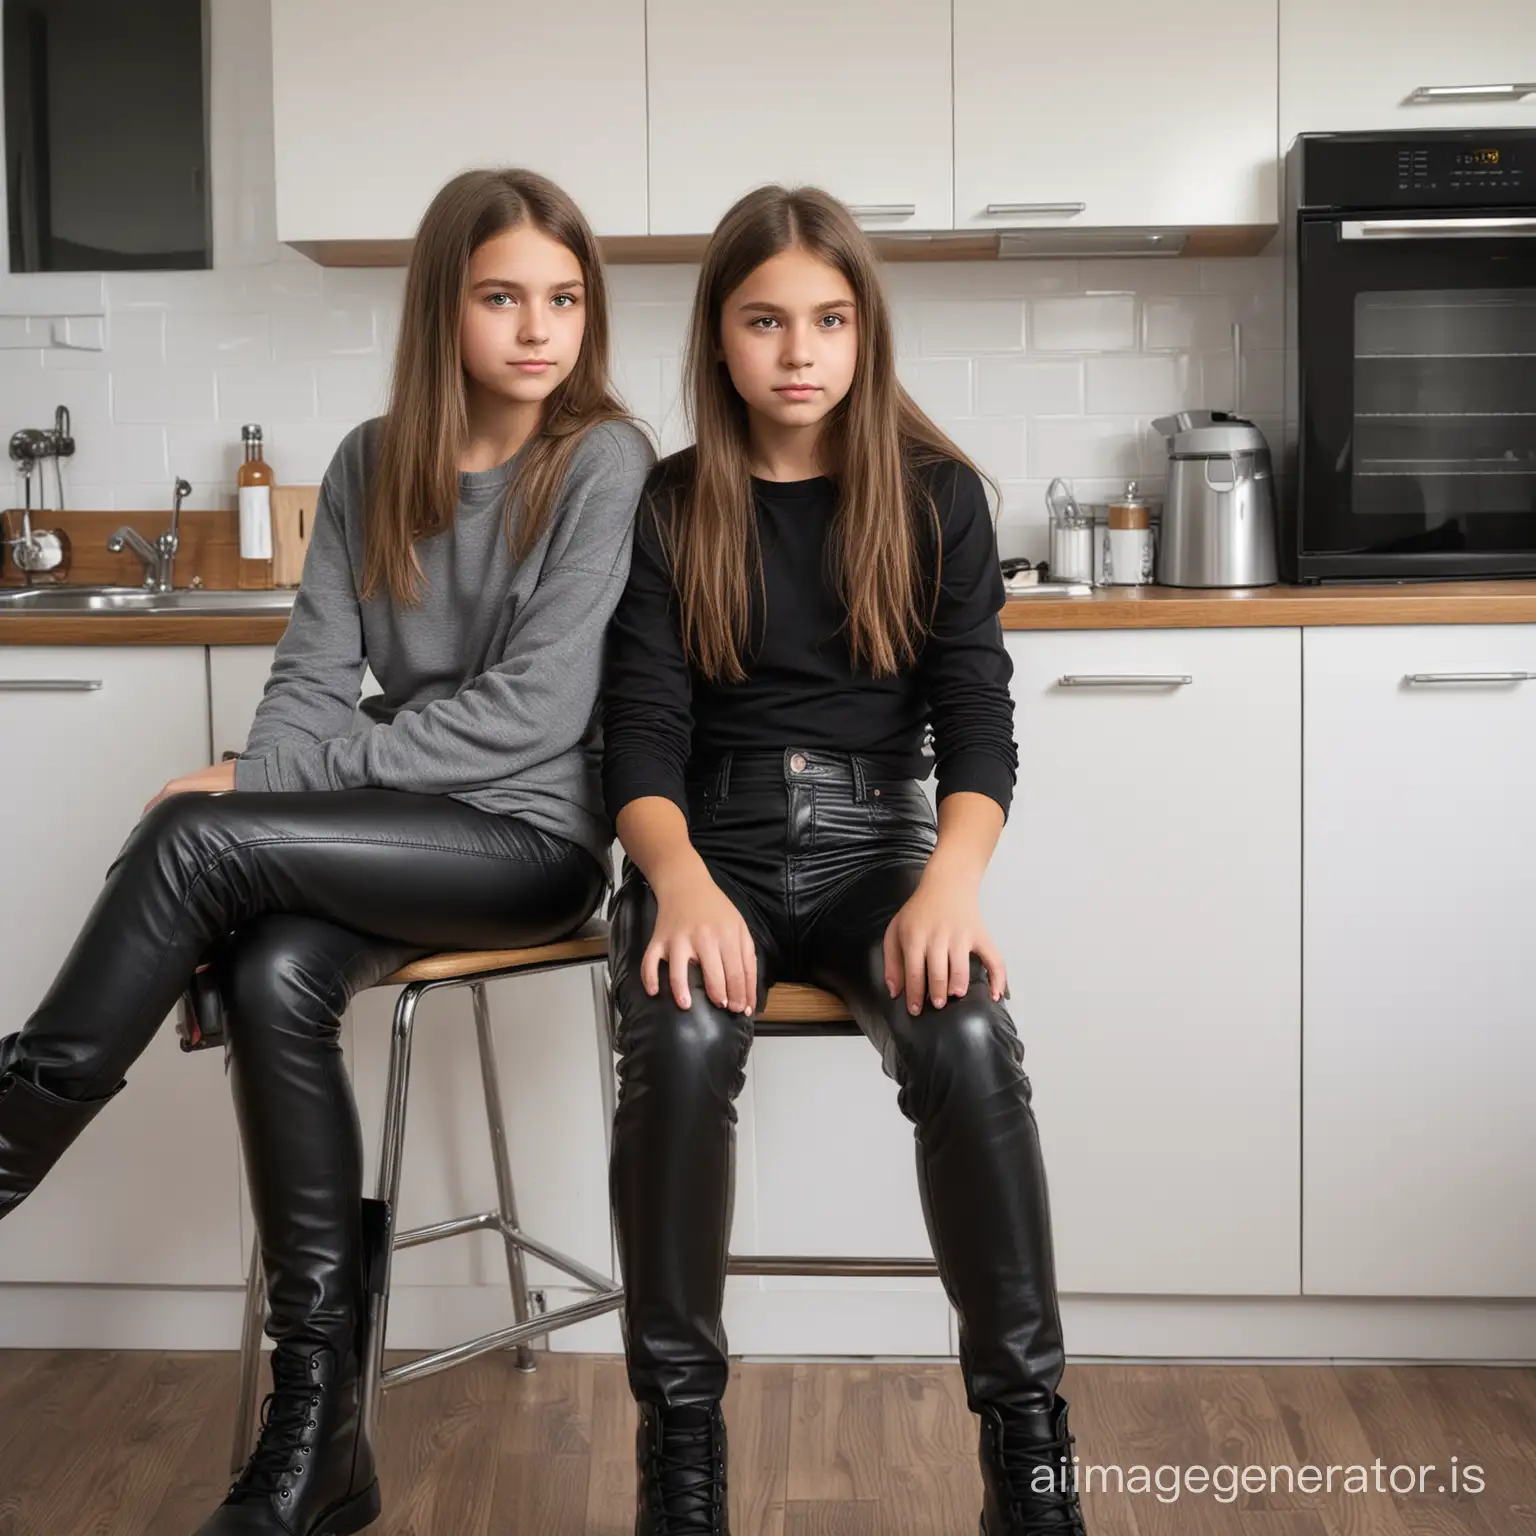 real photo of two girls,13 years,sitting on a chair,tight black leather pants,stern face,kitchen